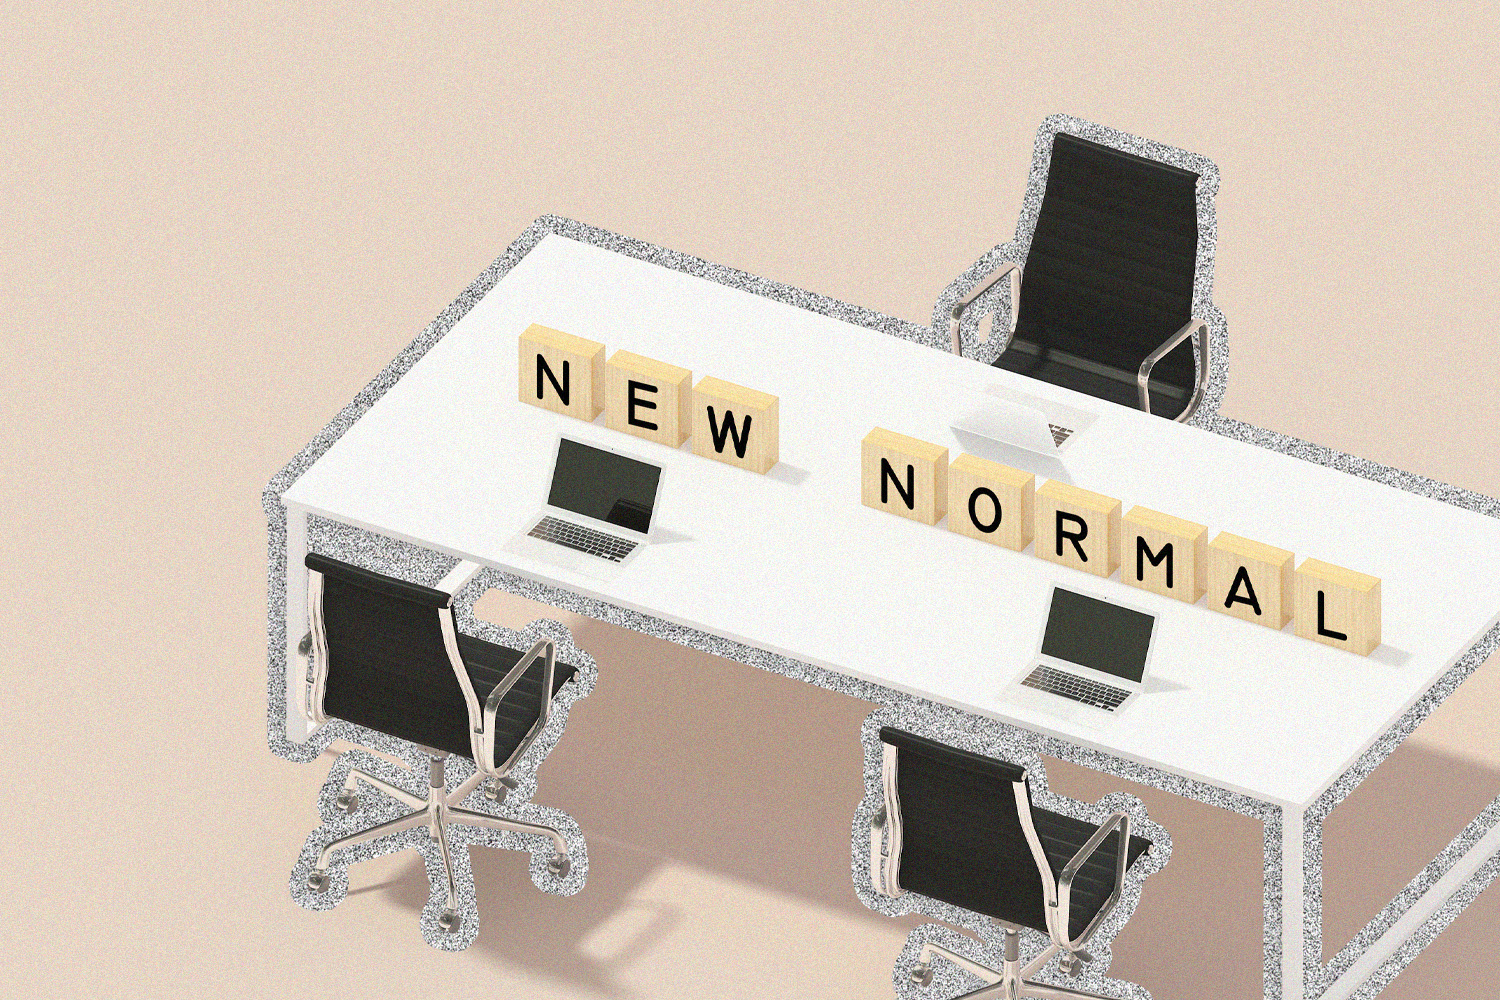 Overhead view of a desk with the letter tiles on it that say "new normal."